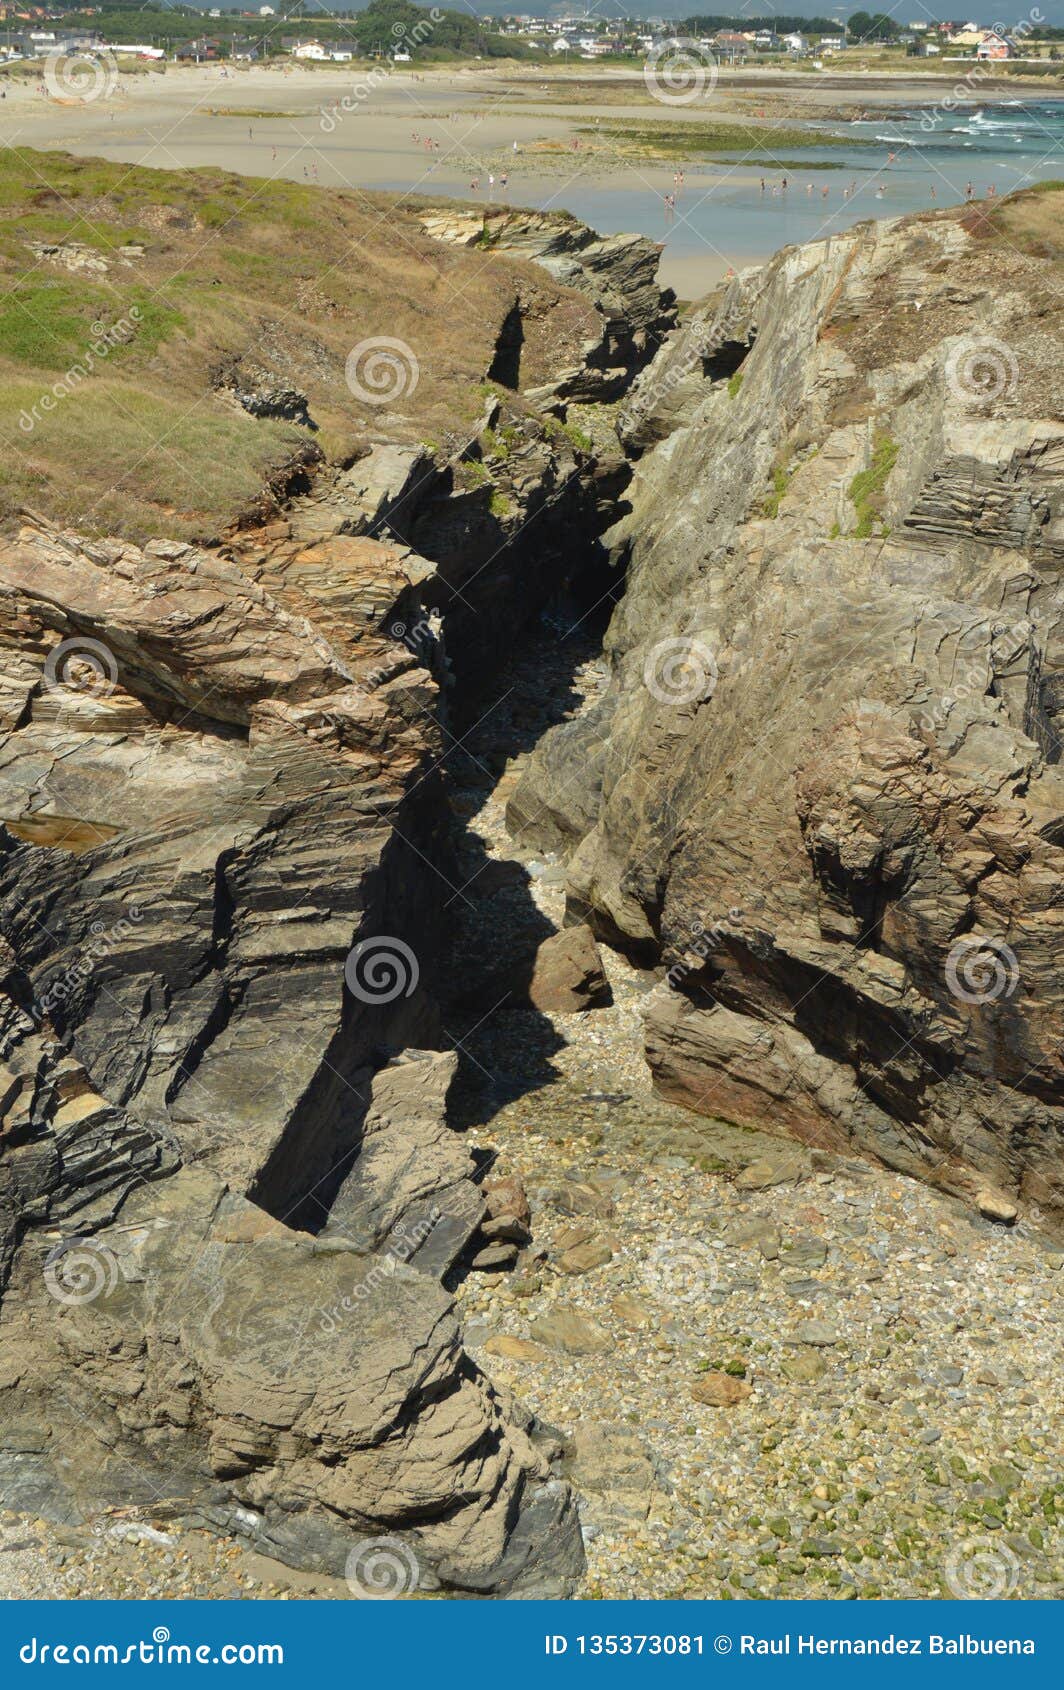 slate rock cracks on the beach of the cathedrals in ribadeo. august 1, 2015. geology, landscapes, travel, vacation, nature. beach